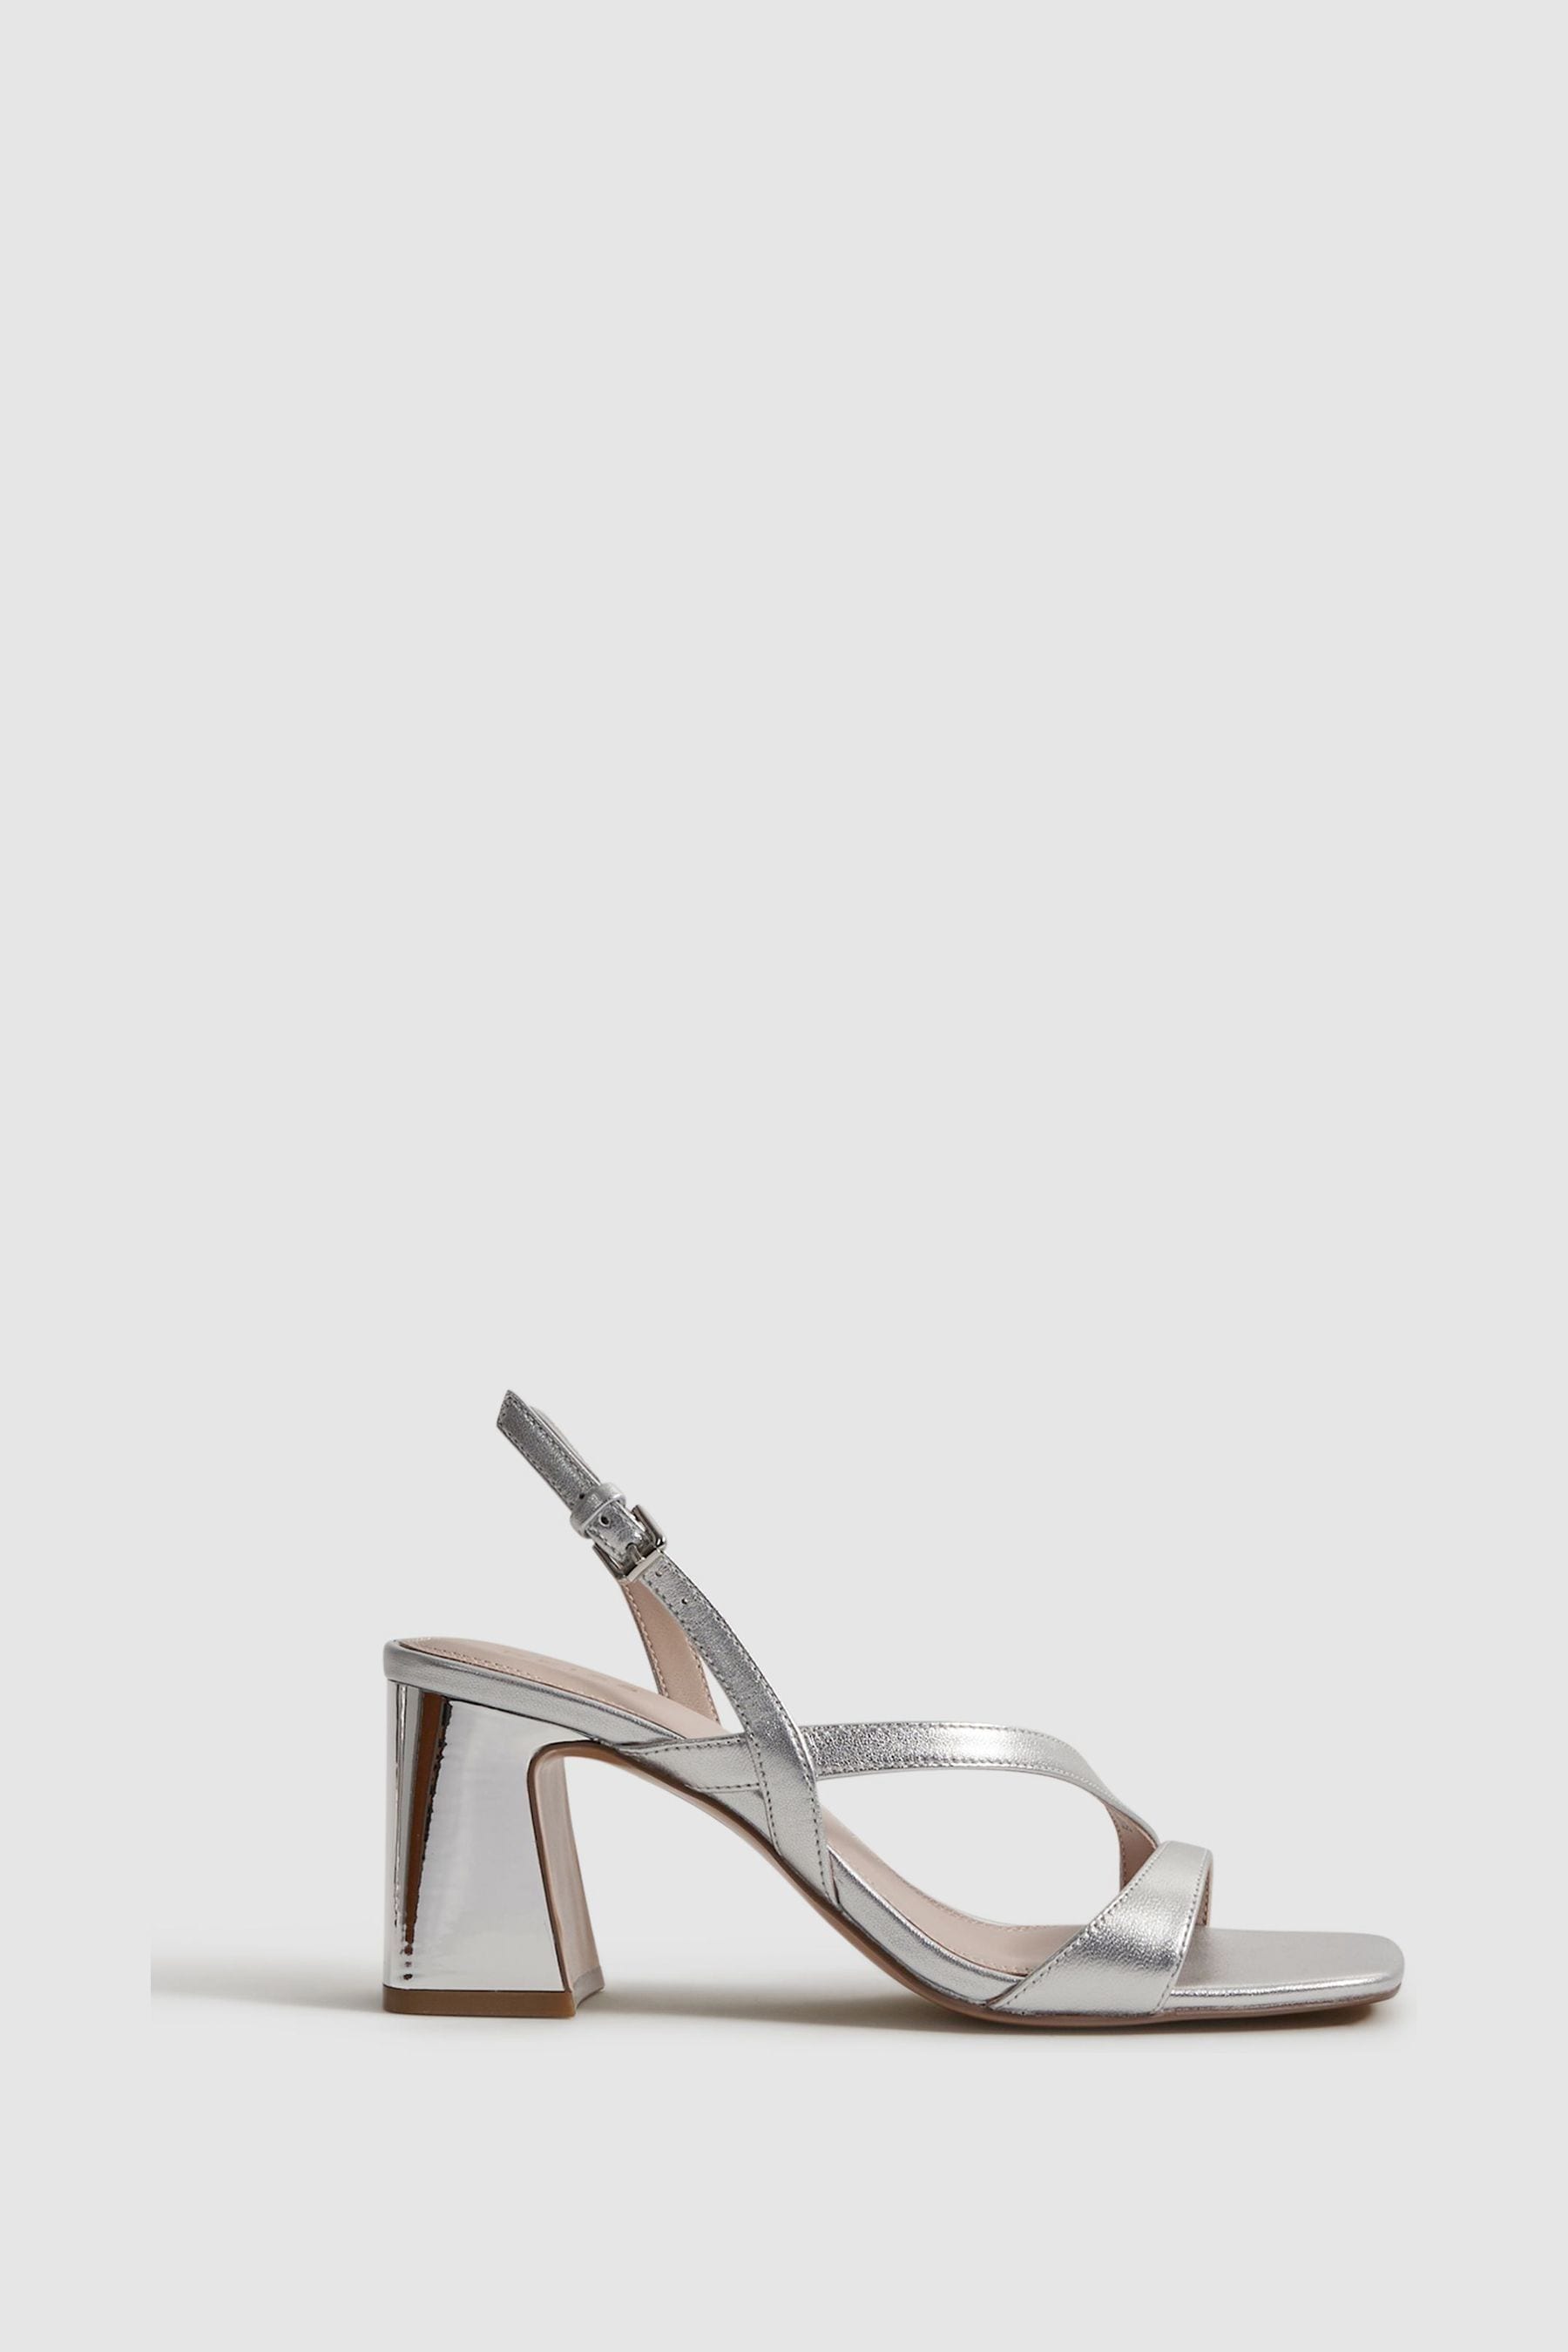 Reiss Alice - Silver Strappy Leather Heeled Sandals, Uk 3 Eu 36